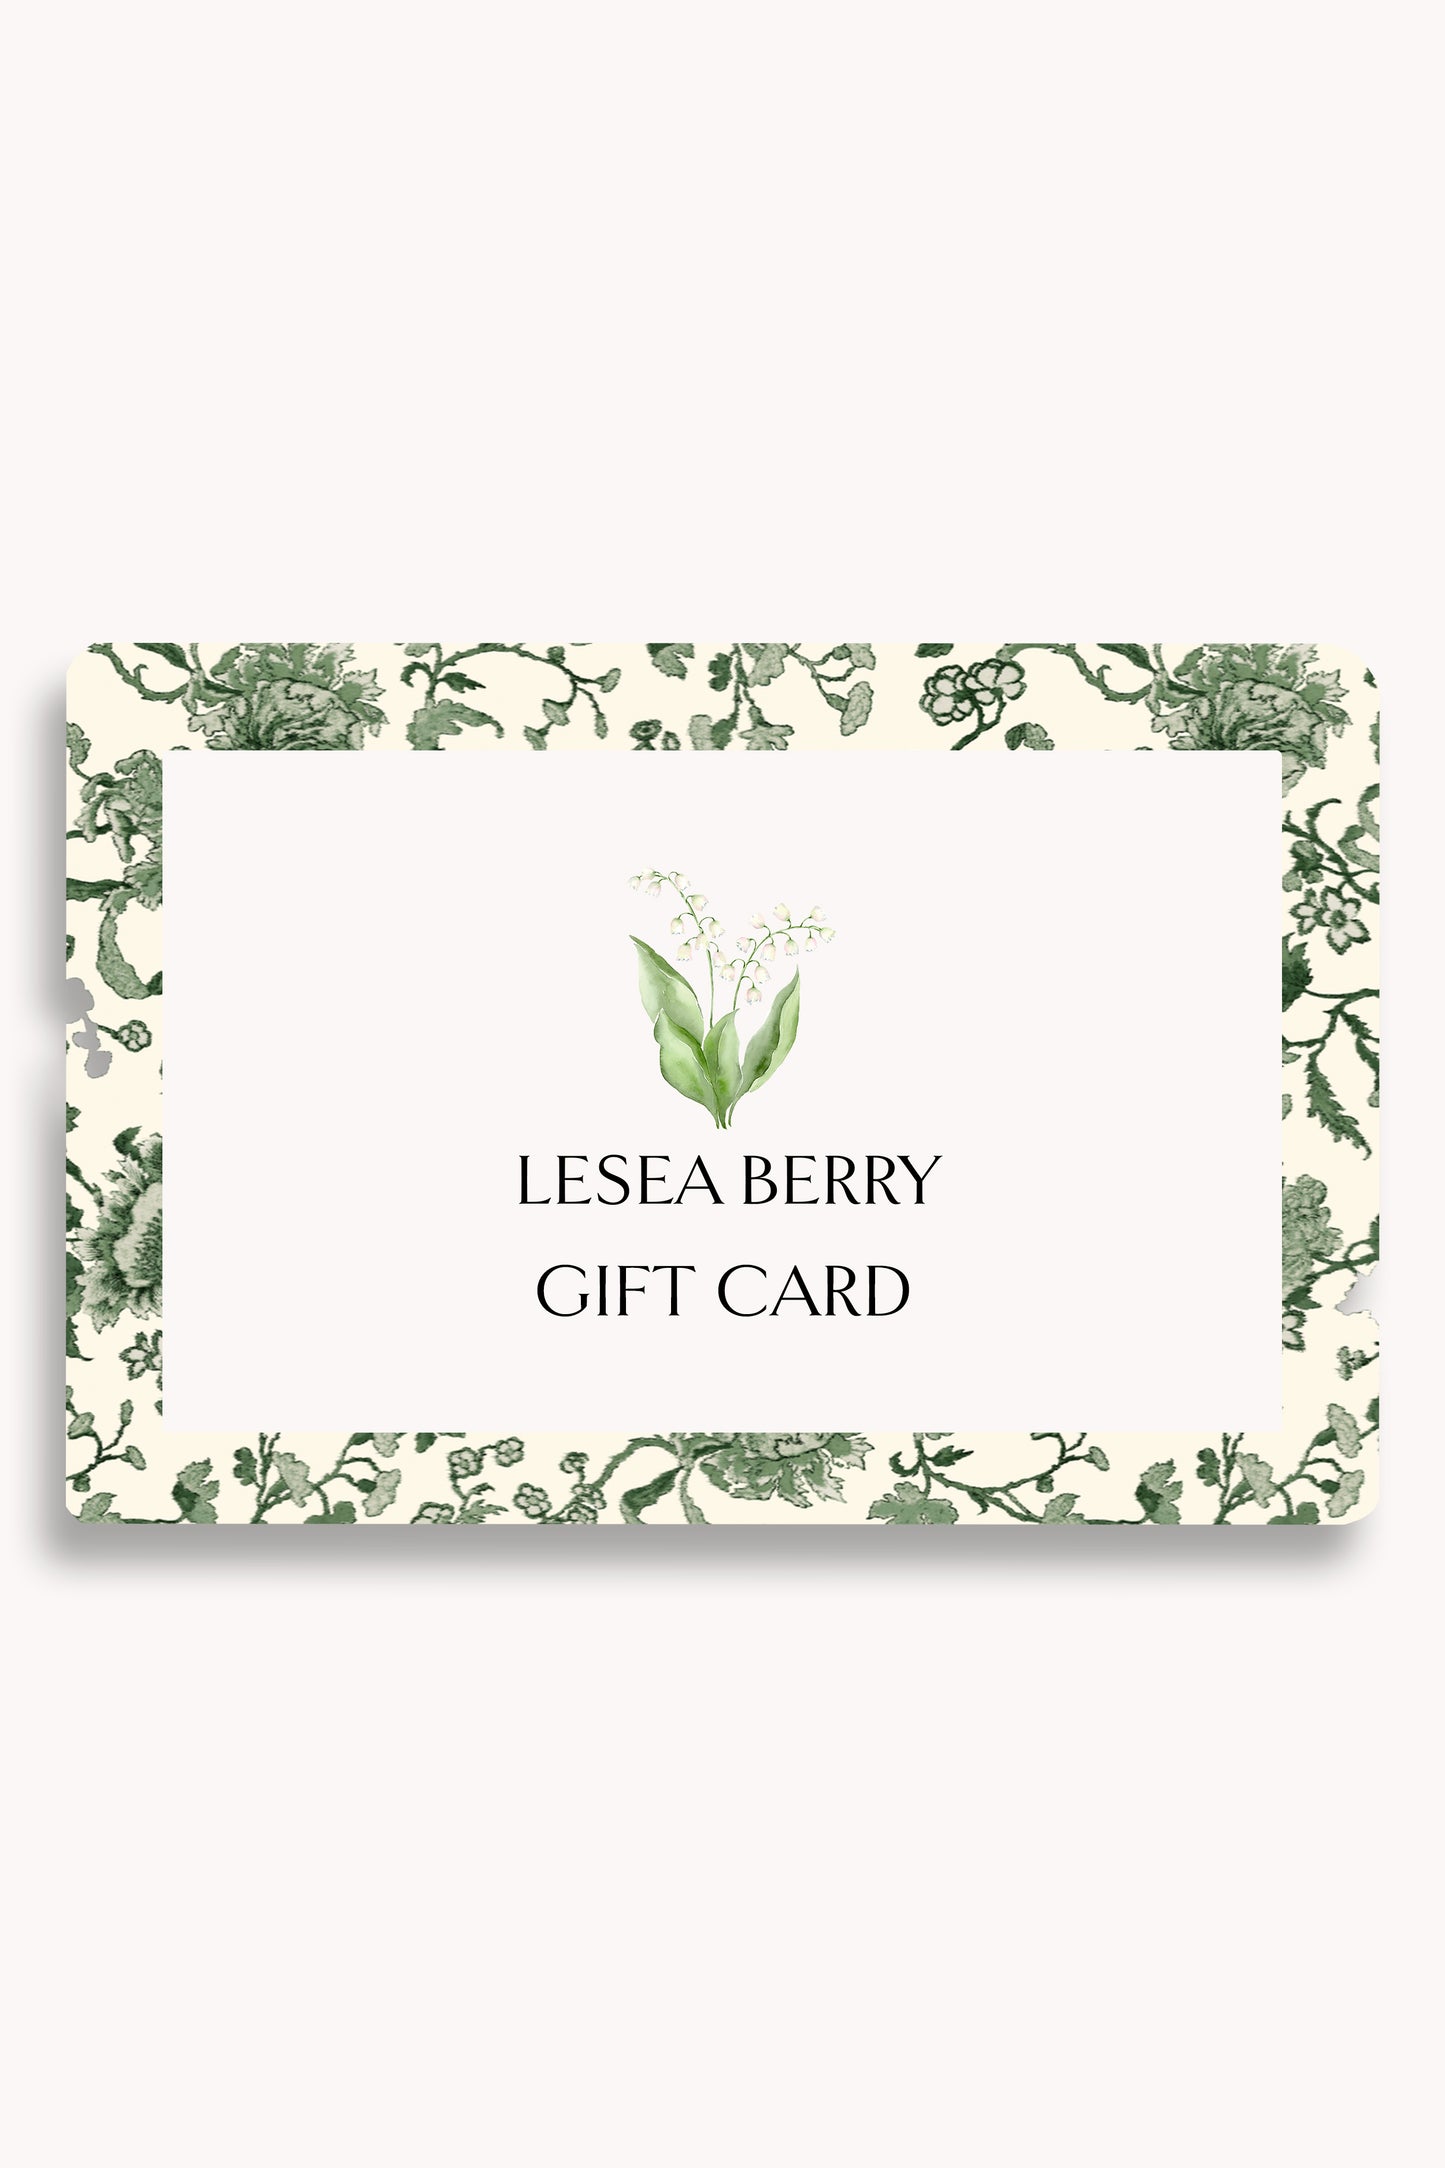 LESEA BERRY Gift Card